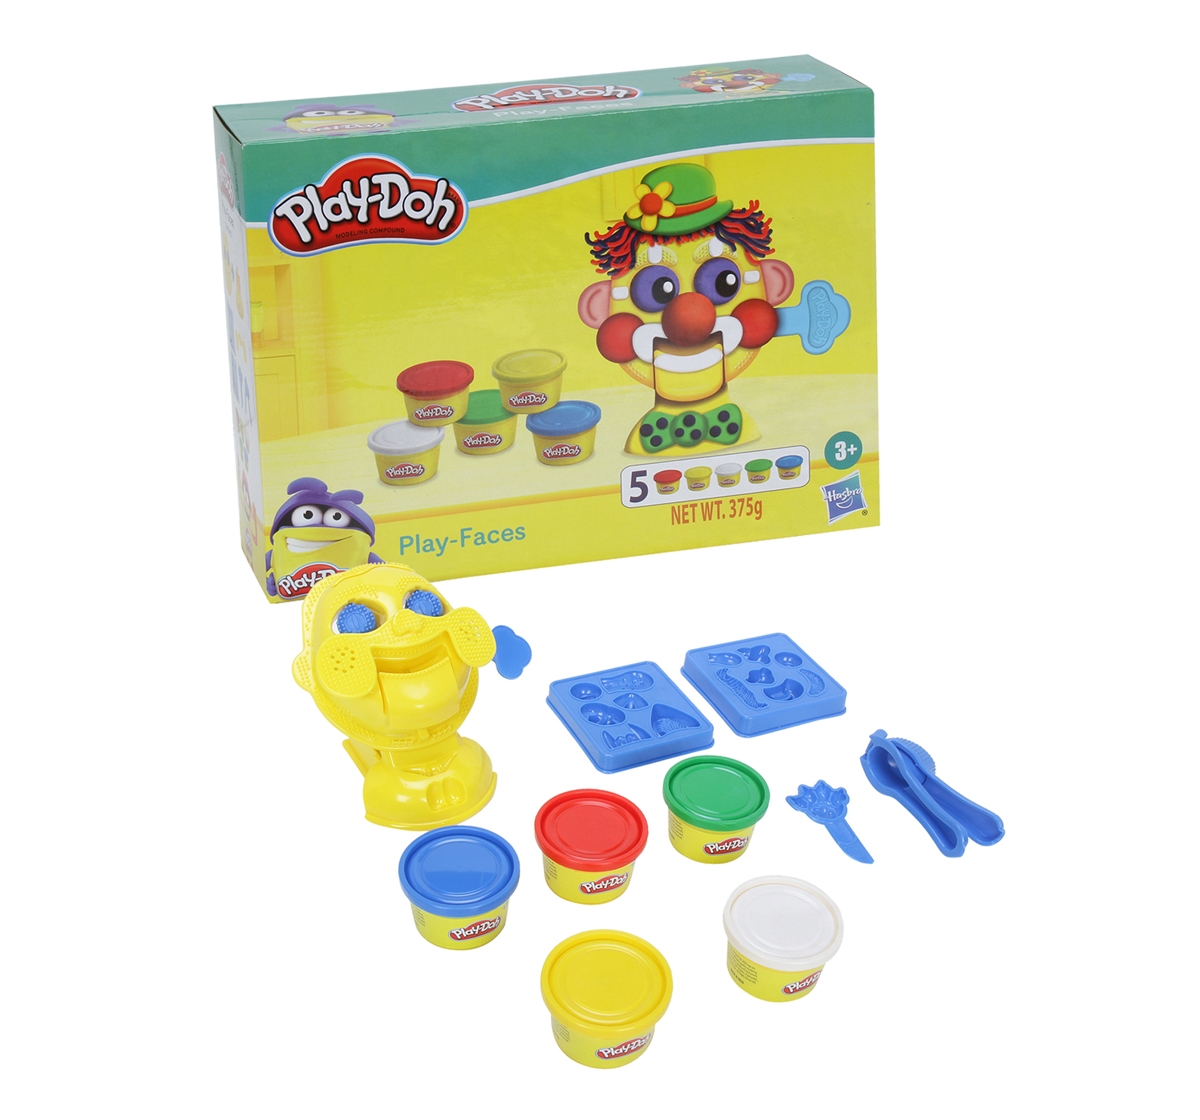 Play-Doh | Play Doh Play Faces Activity Toy for Kids 3Y+, Multicolour